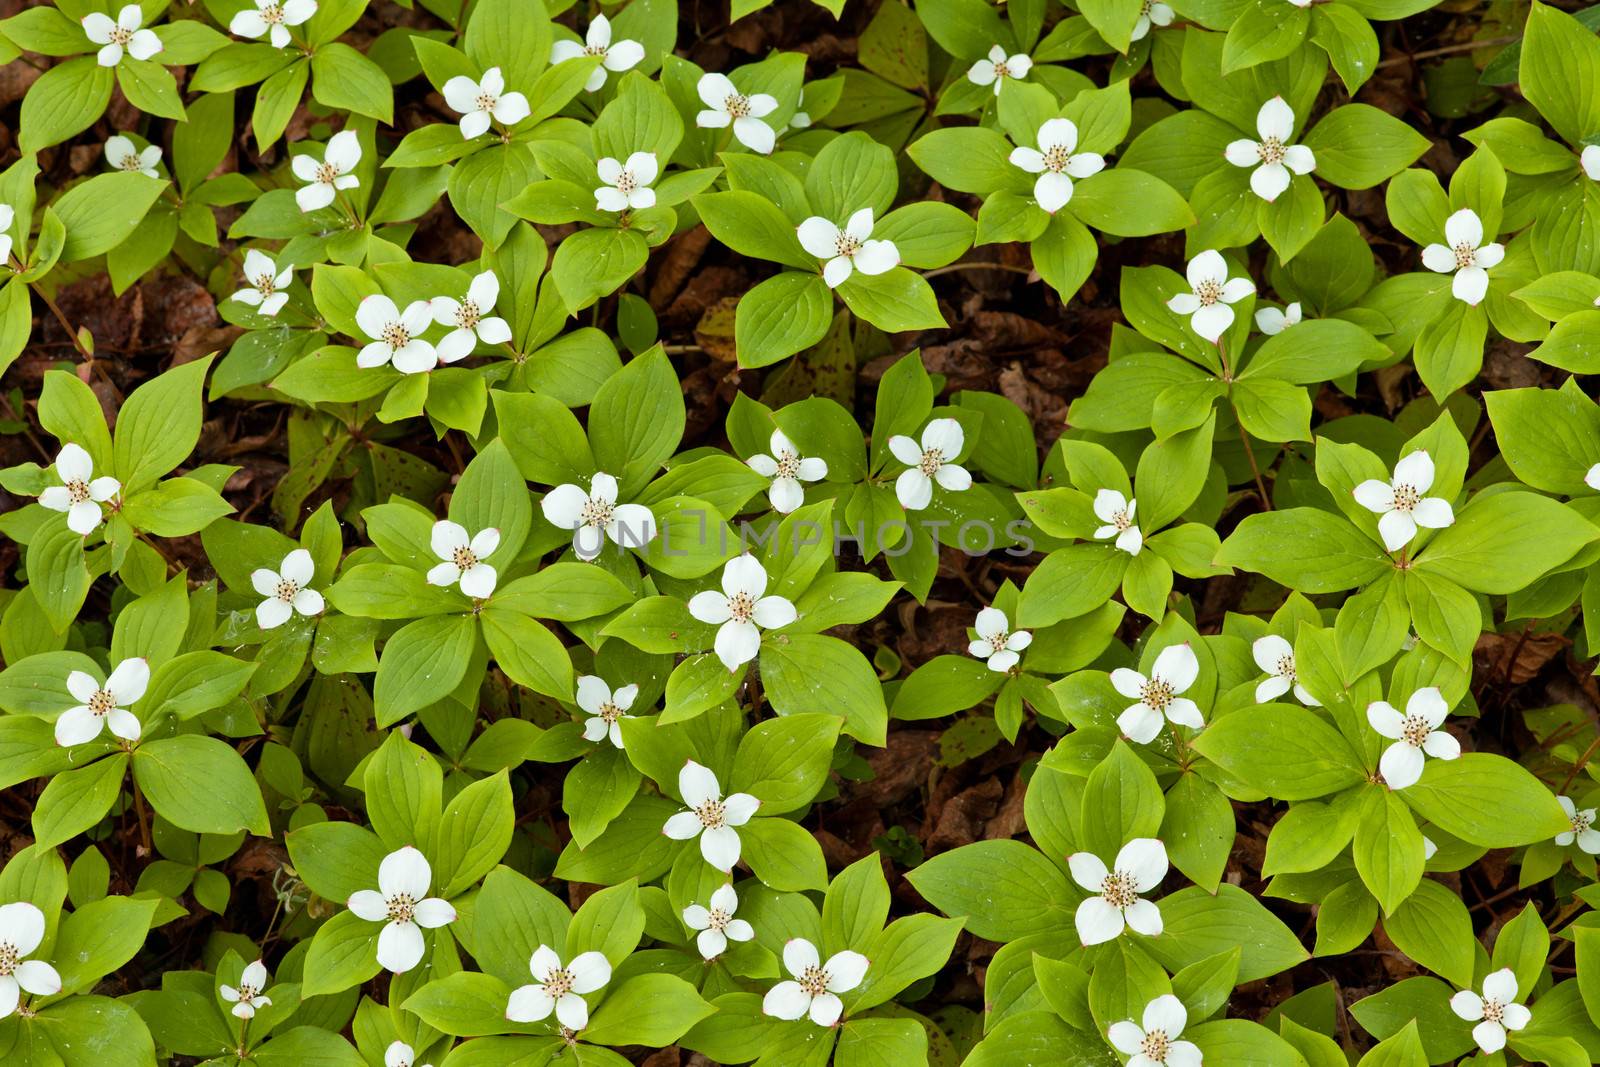 Bunchberry flowers Cornus canadensis or creeping dogwood grow as a carpet of wildflowers on the forest floor in boreal forest taiga of the Yukon Territory Canada